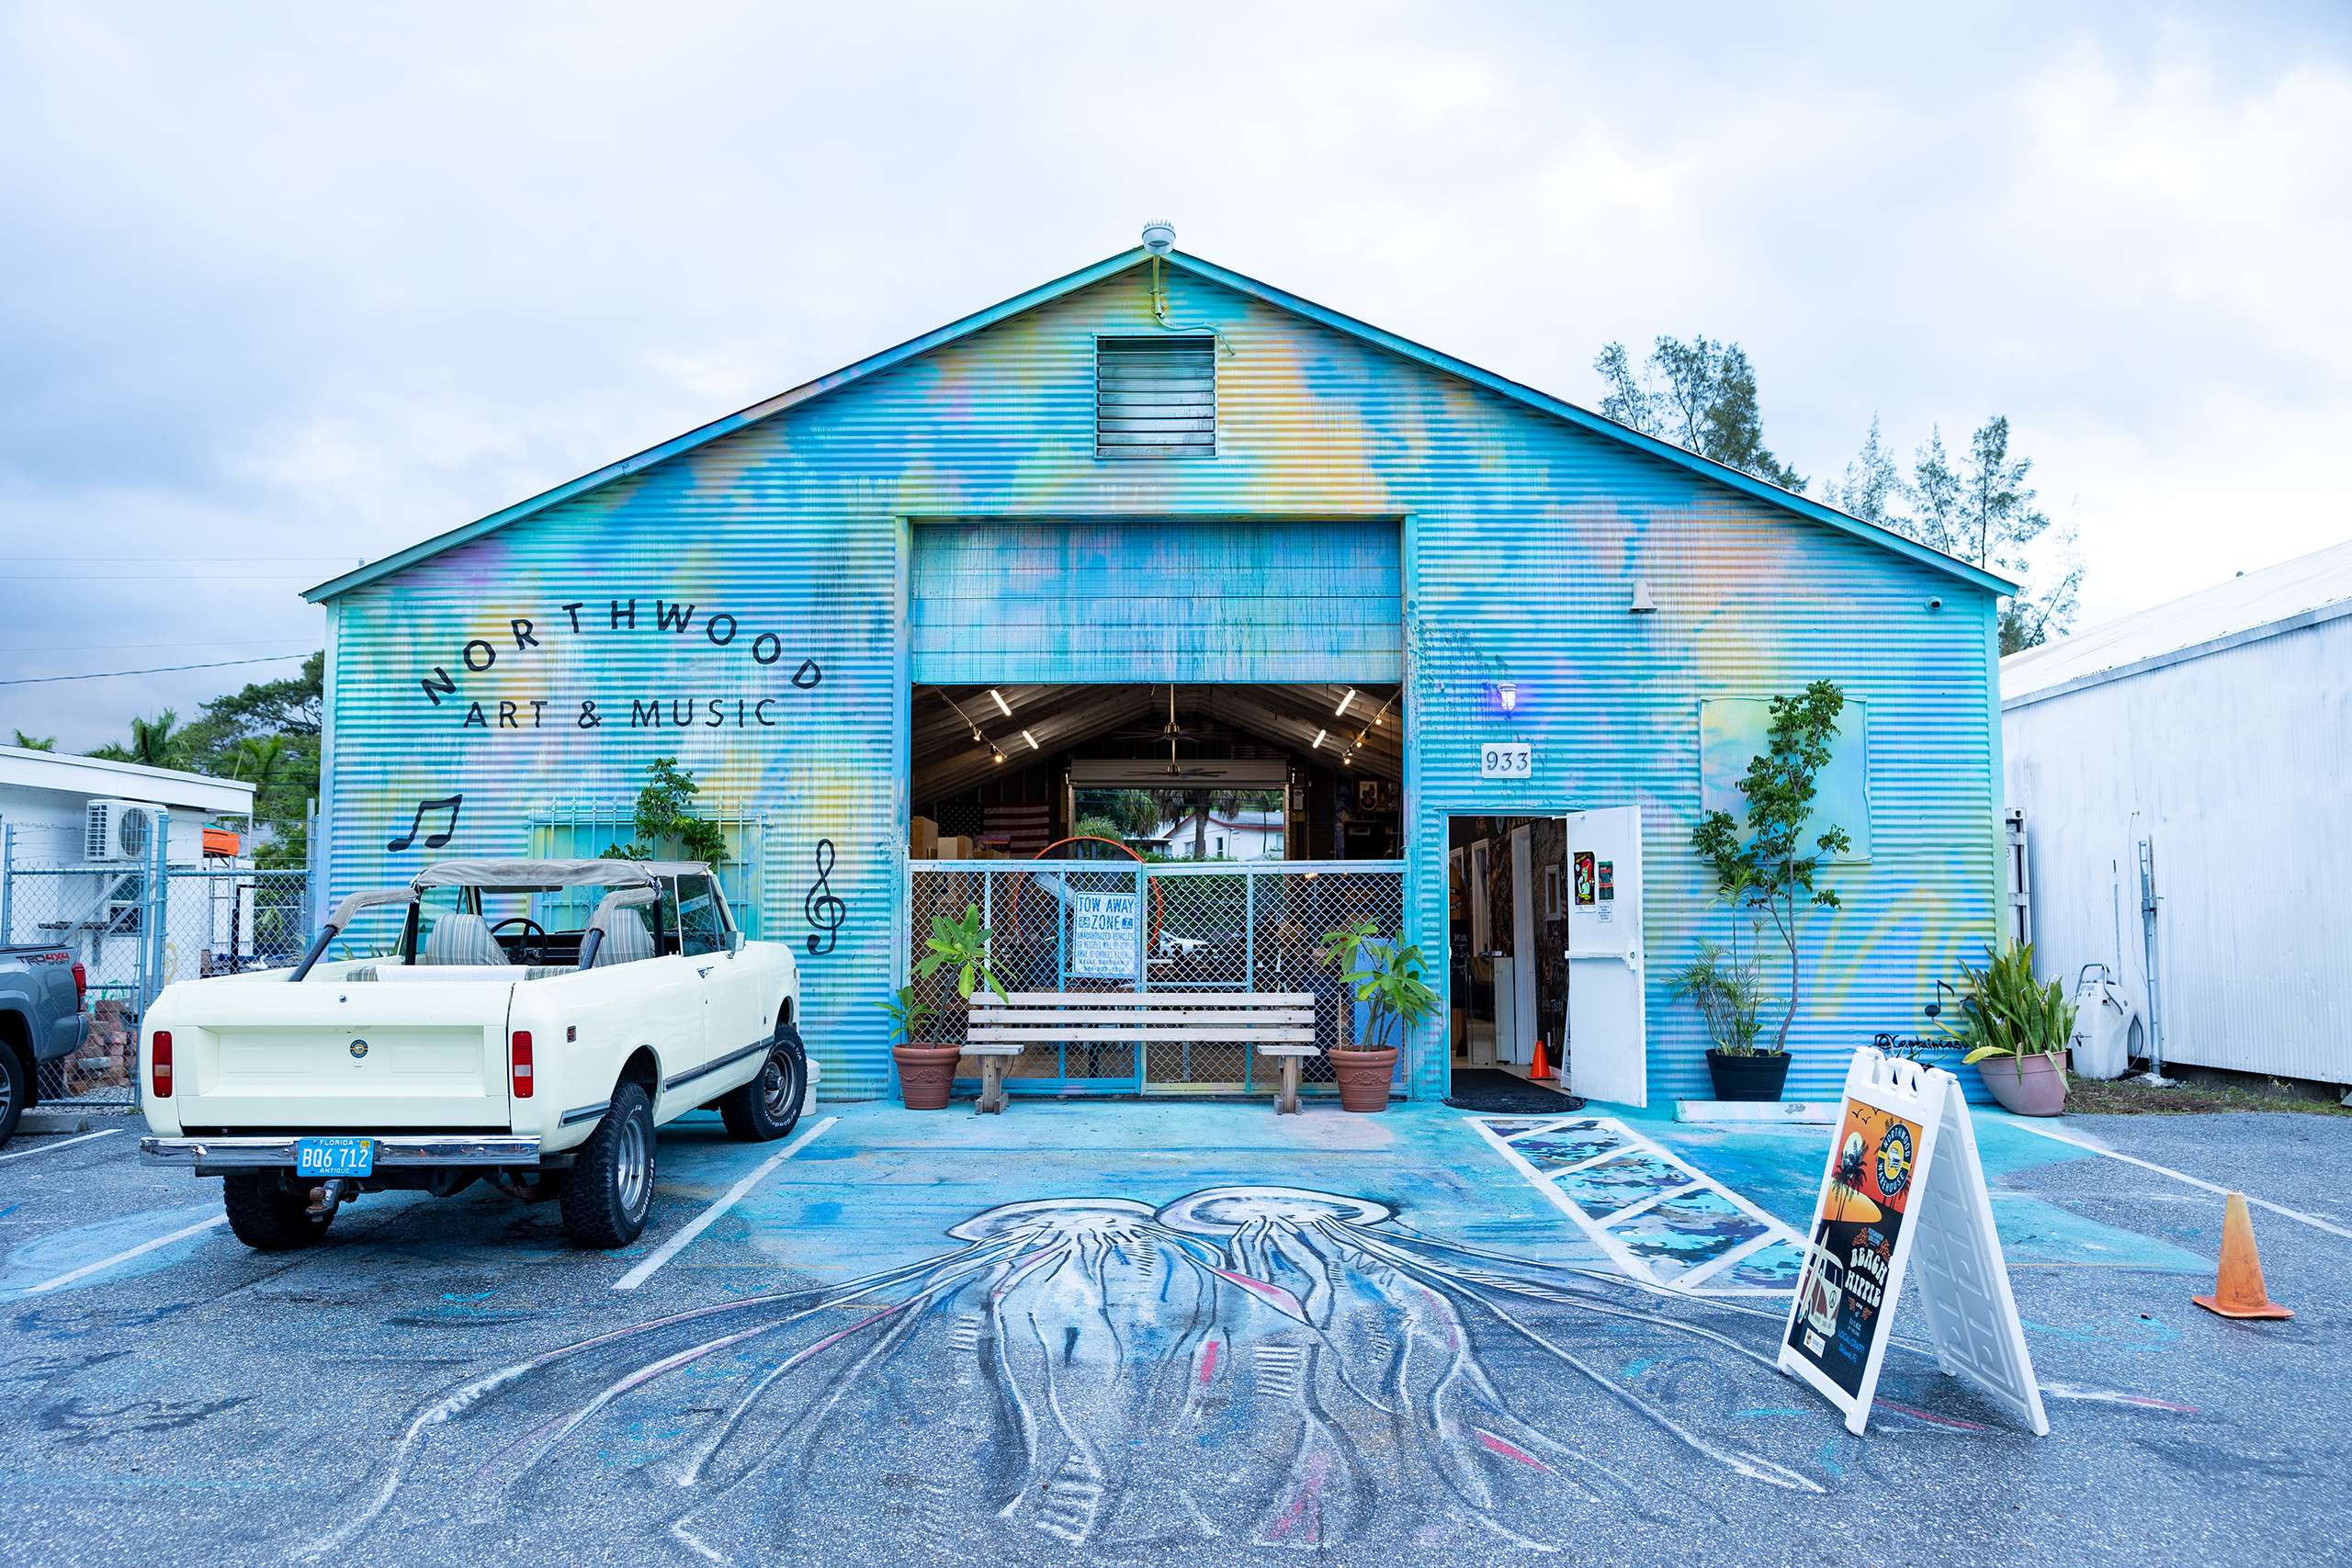 Northwood Art and Music warehouse in West Palm Beach, FL.